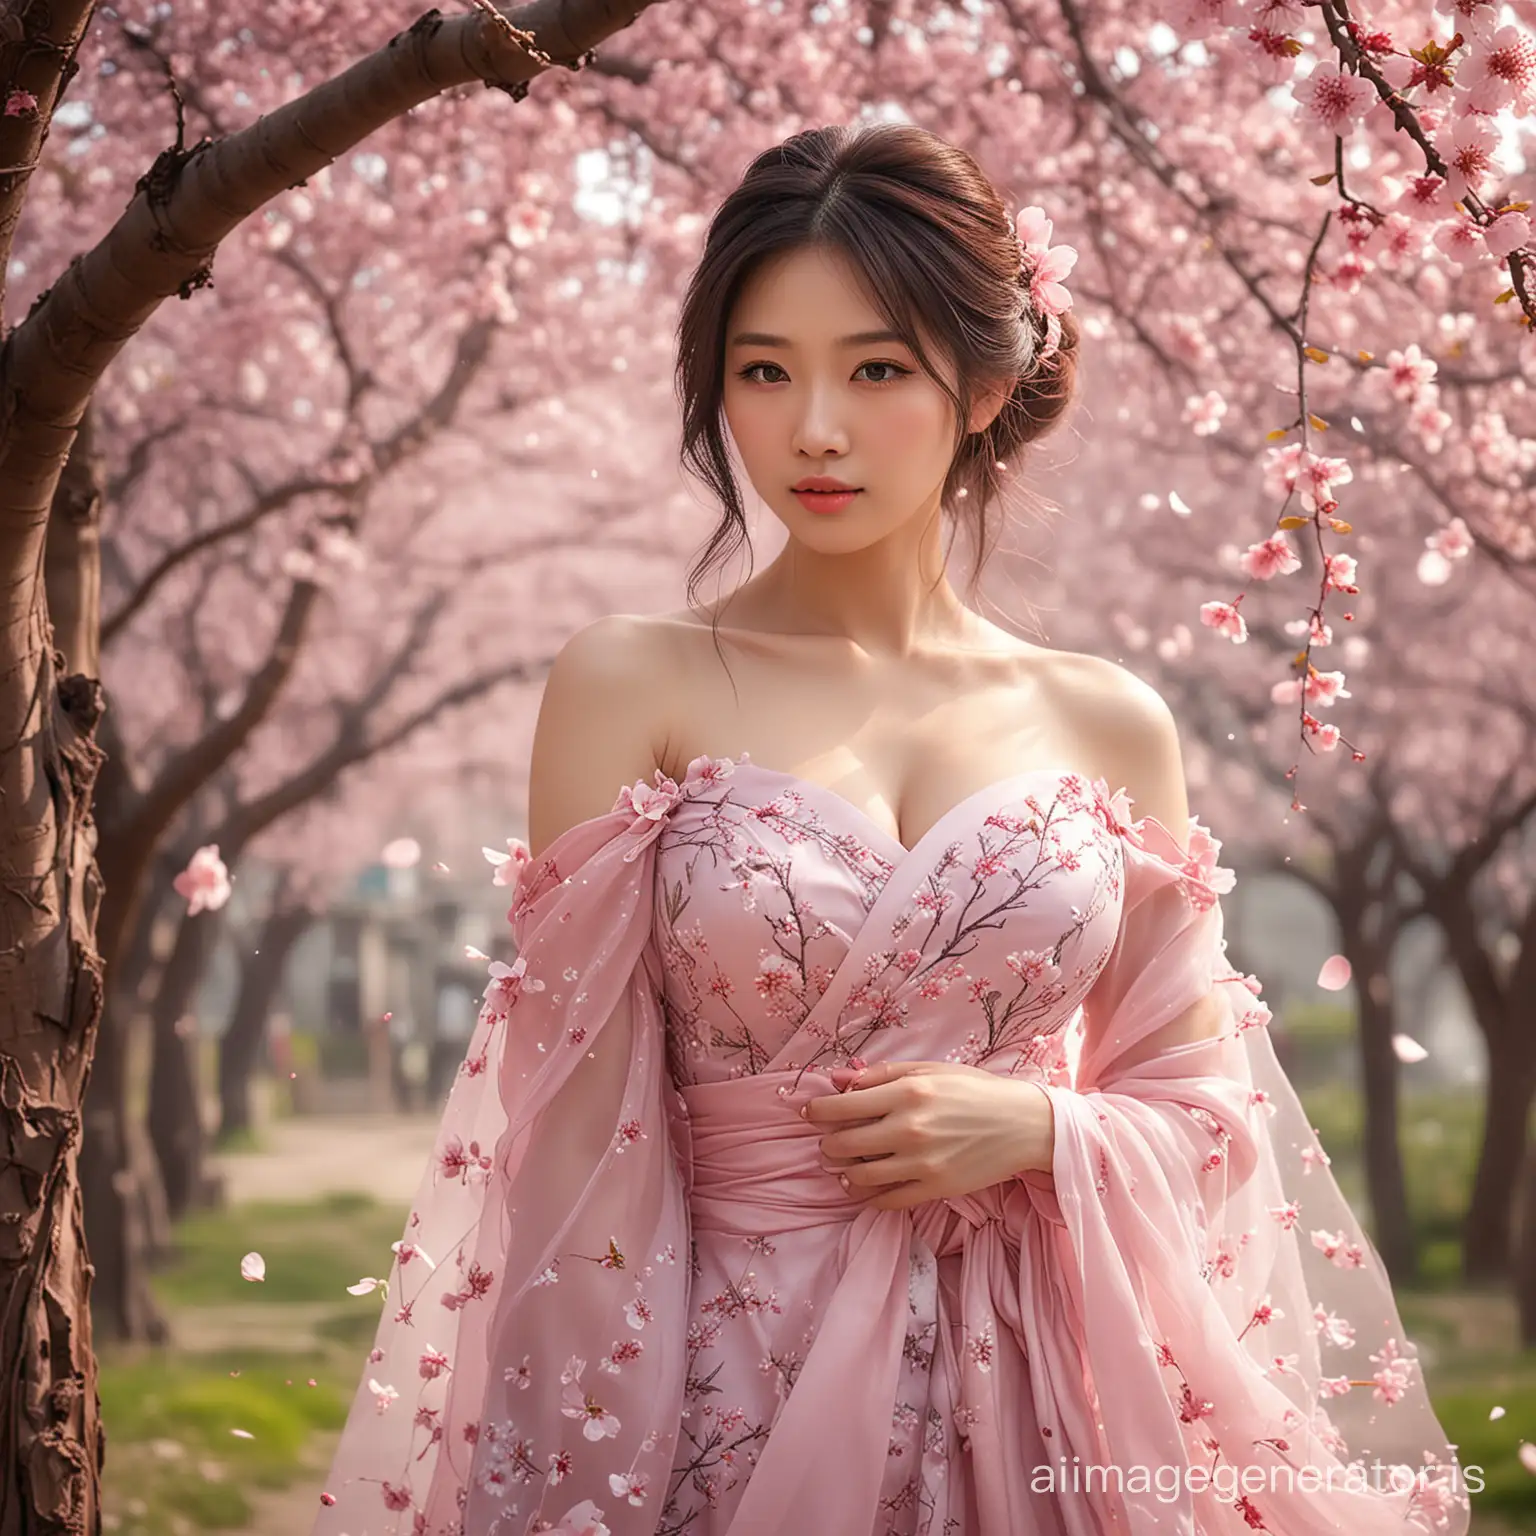 Ethereal-Fantasy-Korean-Woman-with-Cherry-Blossoms